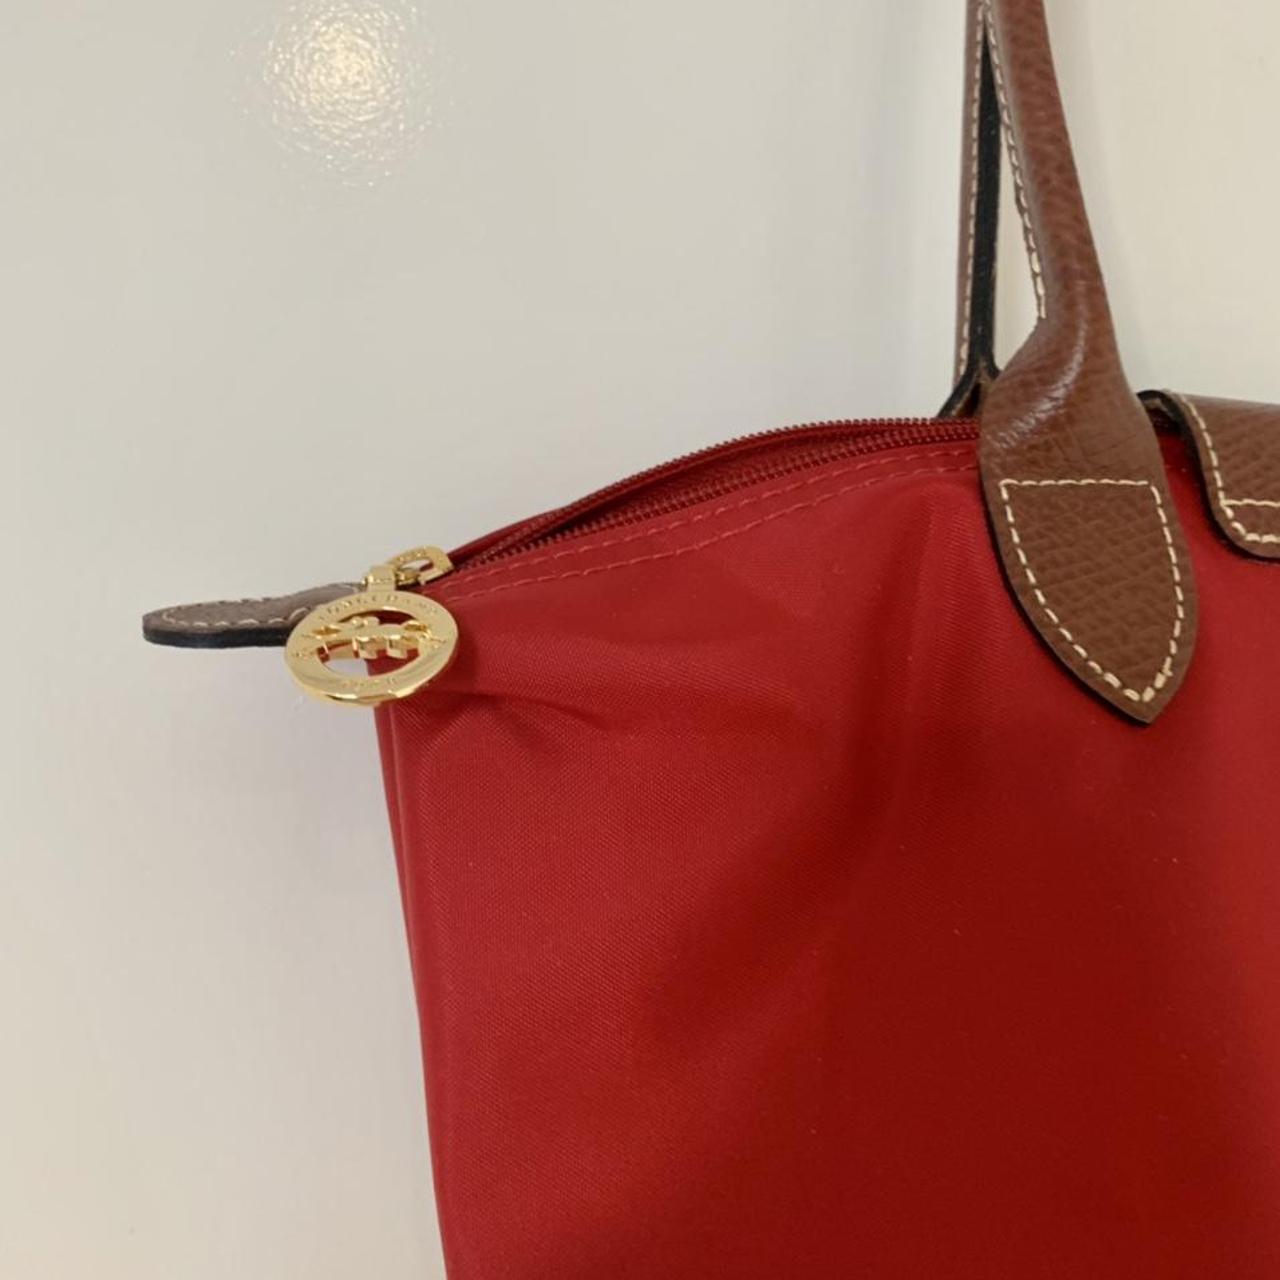 Longchamp Le Pliage Tote Bag - Red Never Used... - Depop